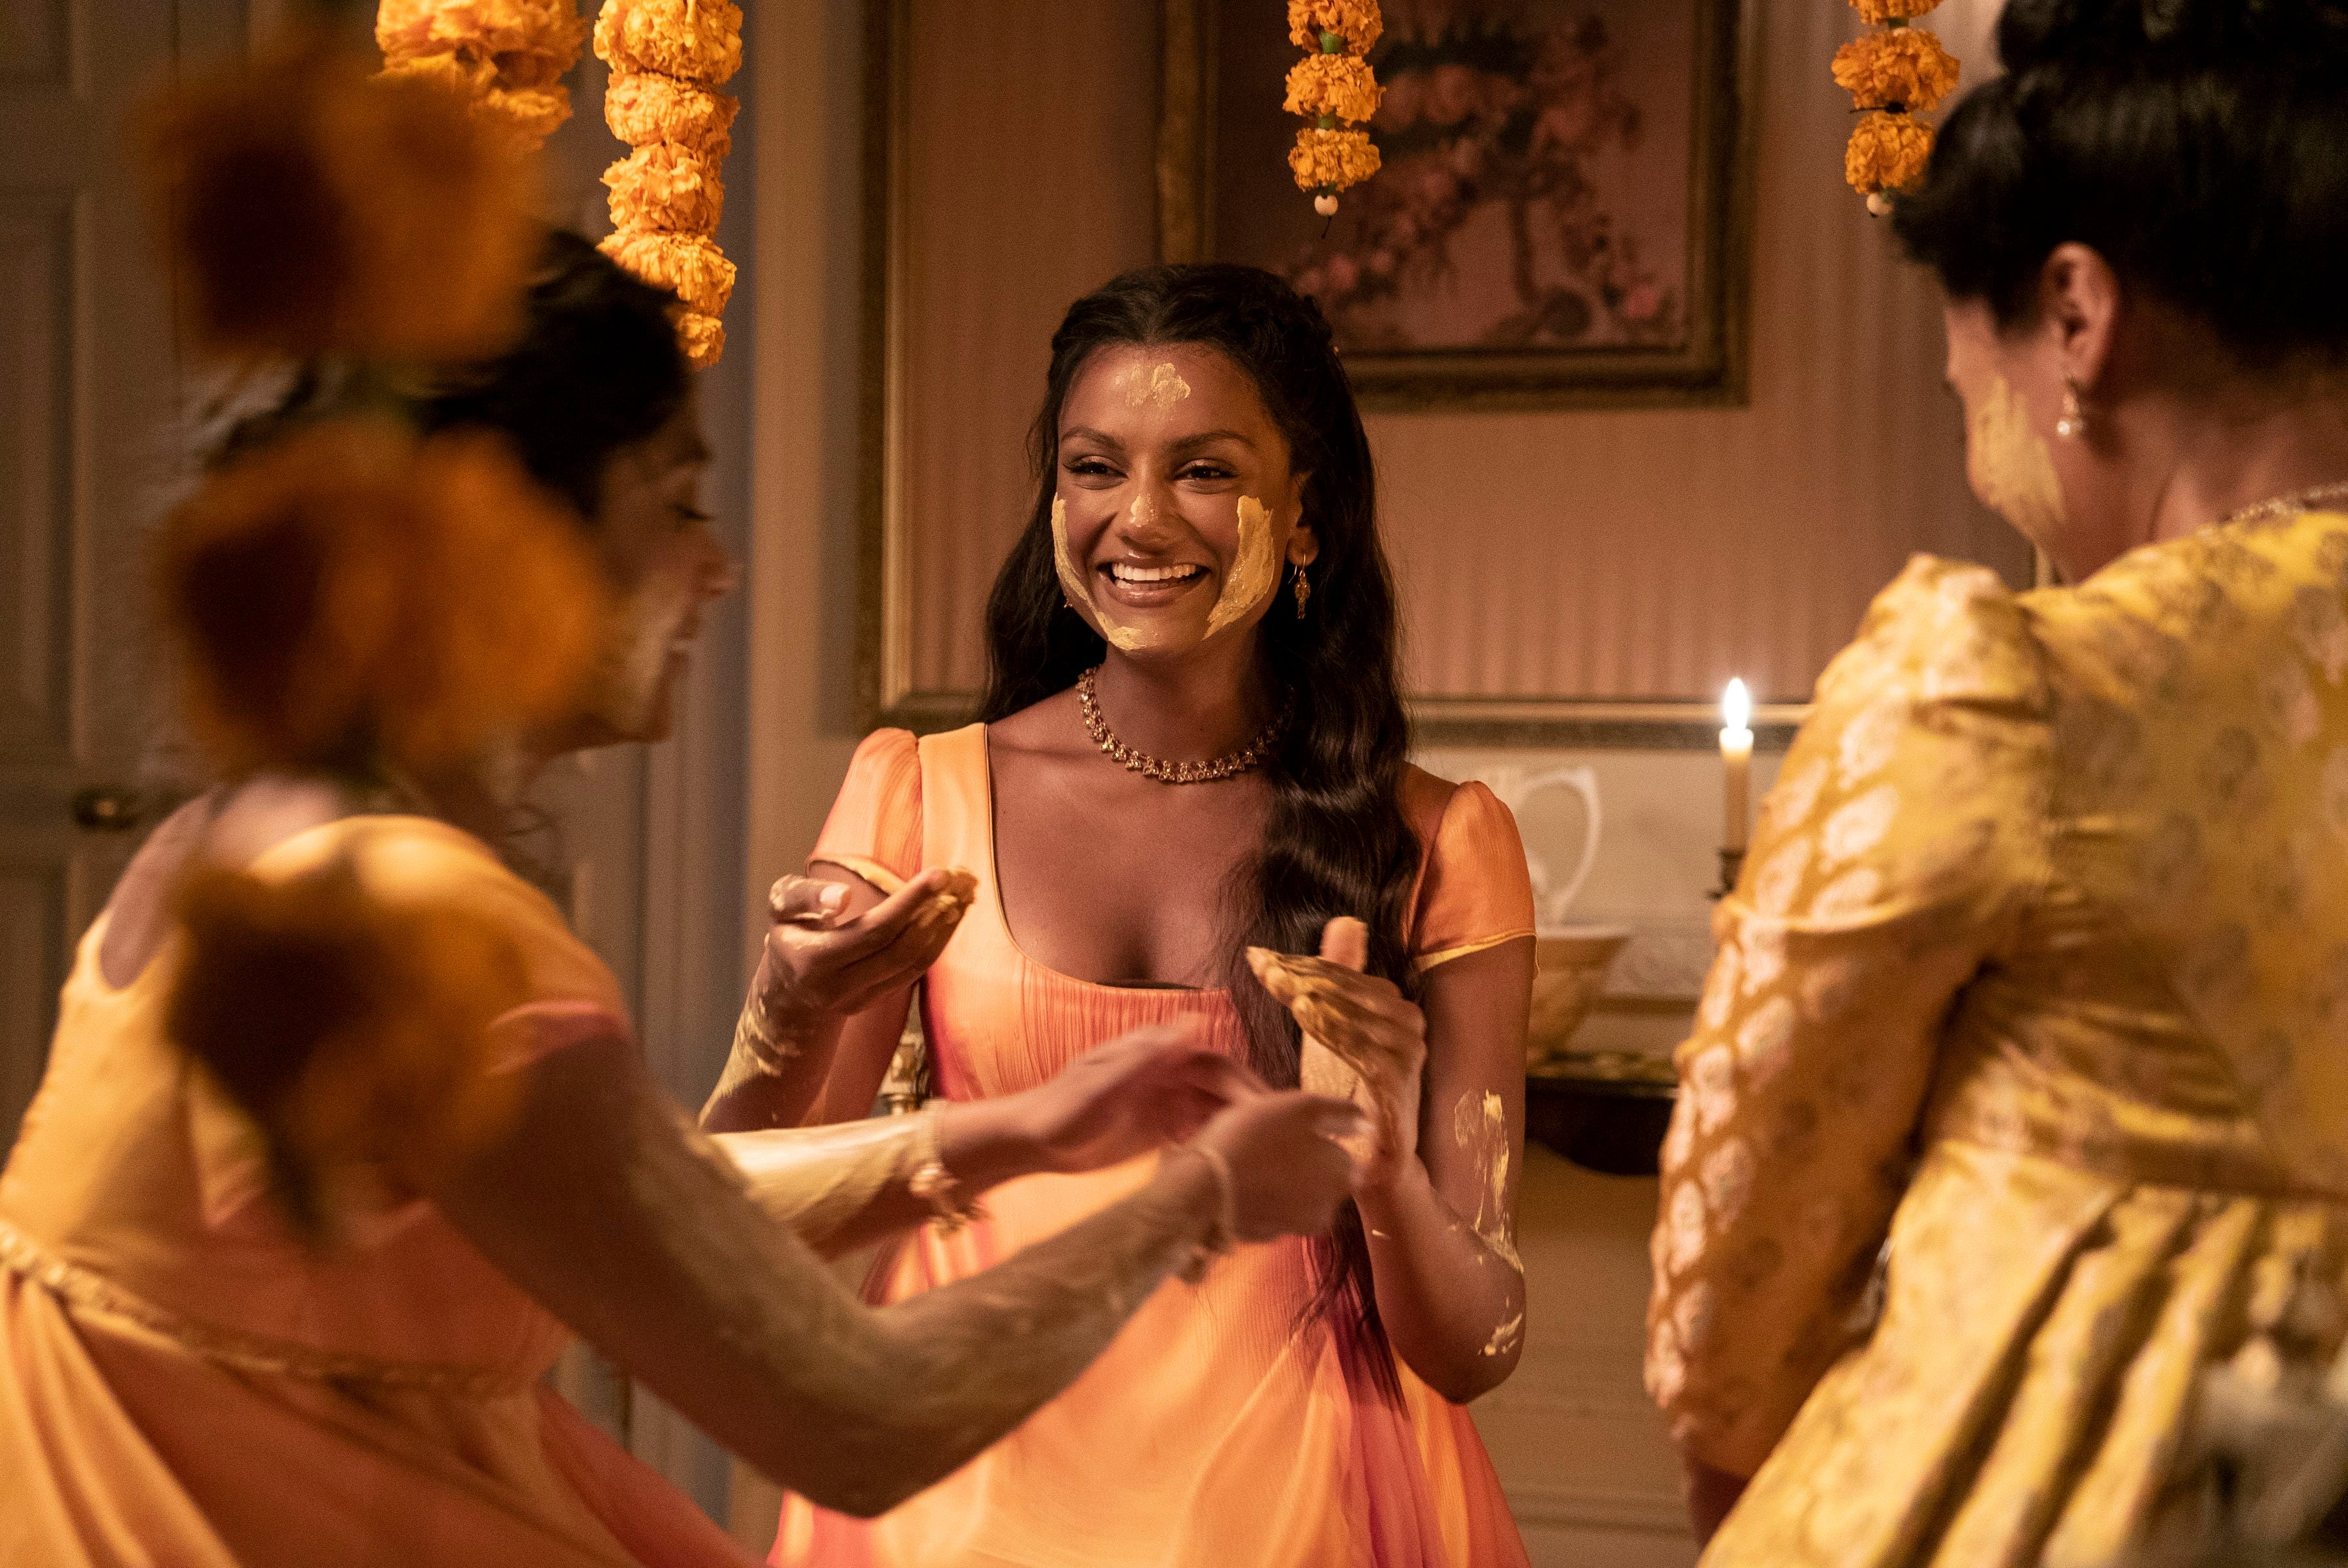 What did 'Bridgerton' get wrong in its depictions of South Asian characters?